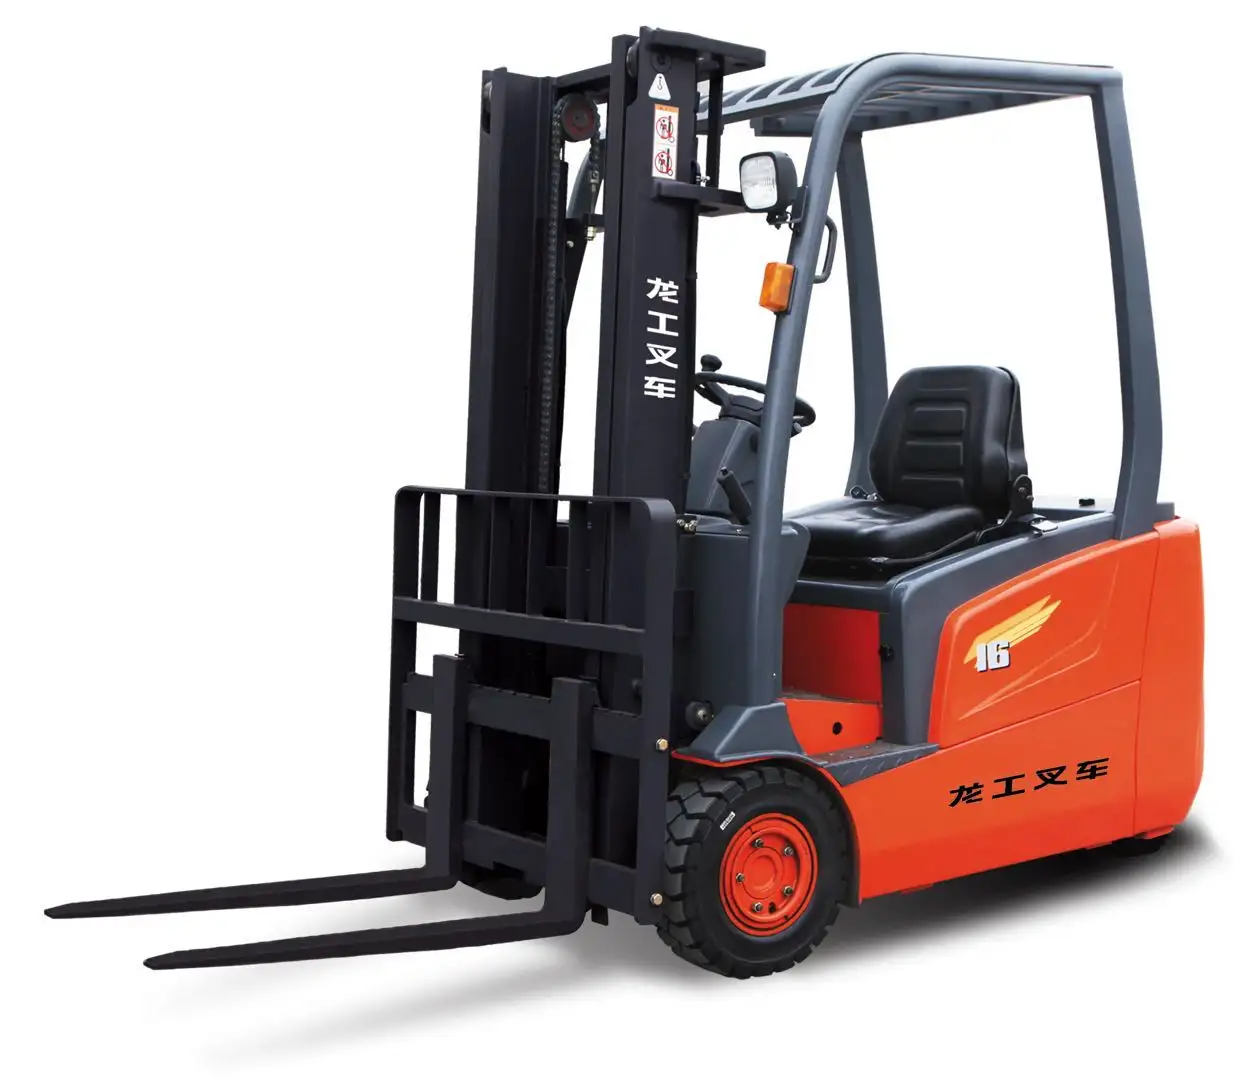 MSDS CNAS LONKING 1.5t 2t 2.5t 3t lithium electric forklift Optional battery and plug 80v forklift electric with CE ISO